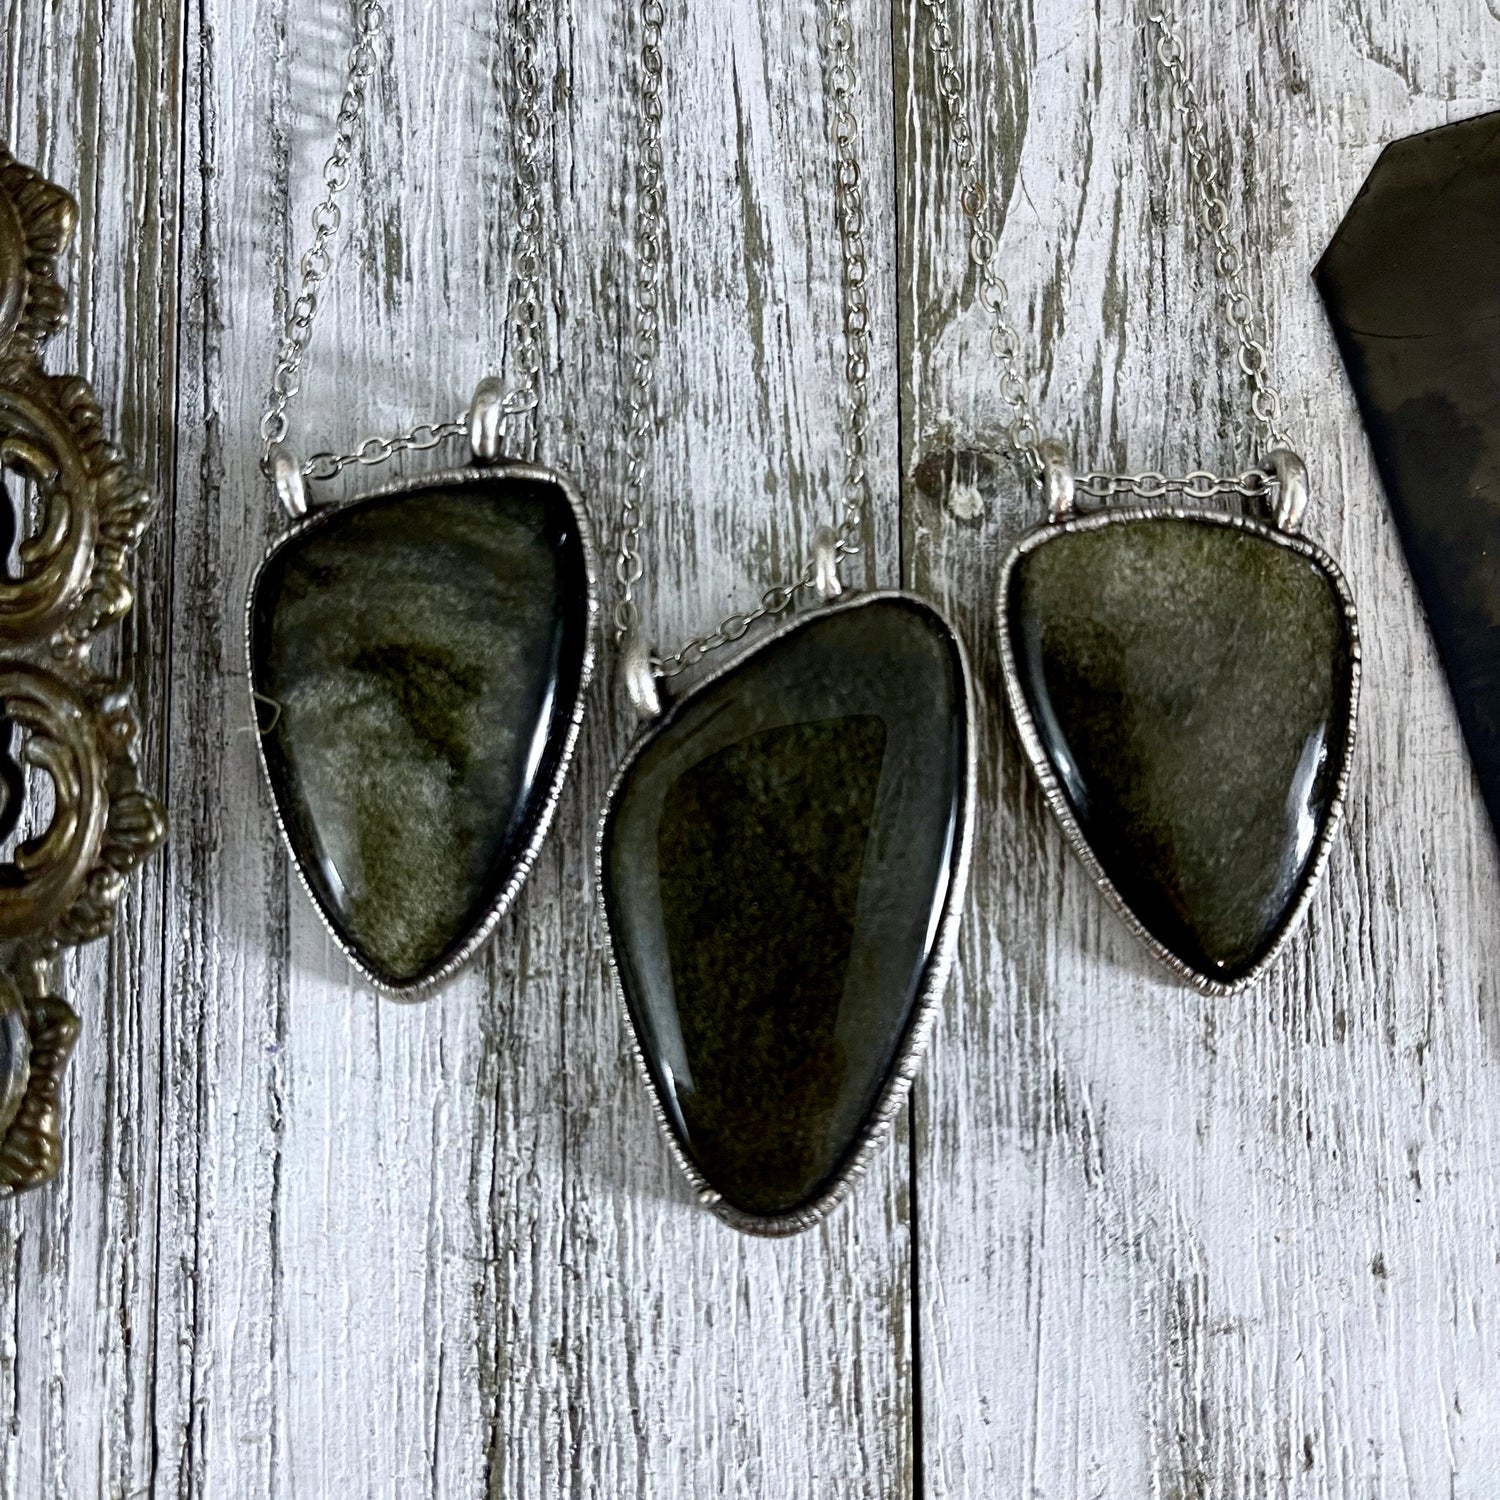 Asymmetric Golden Sheen Obsidian Necklace in Fine Silver / Foxlark Collection - One of a Kind